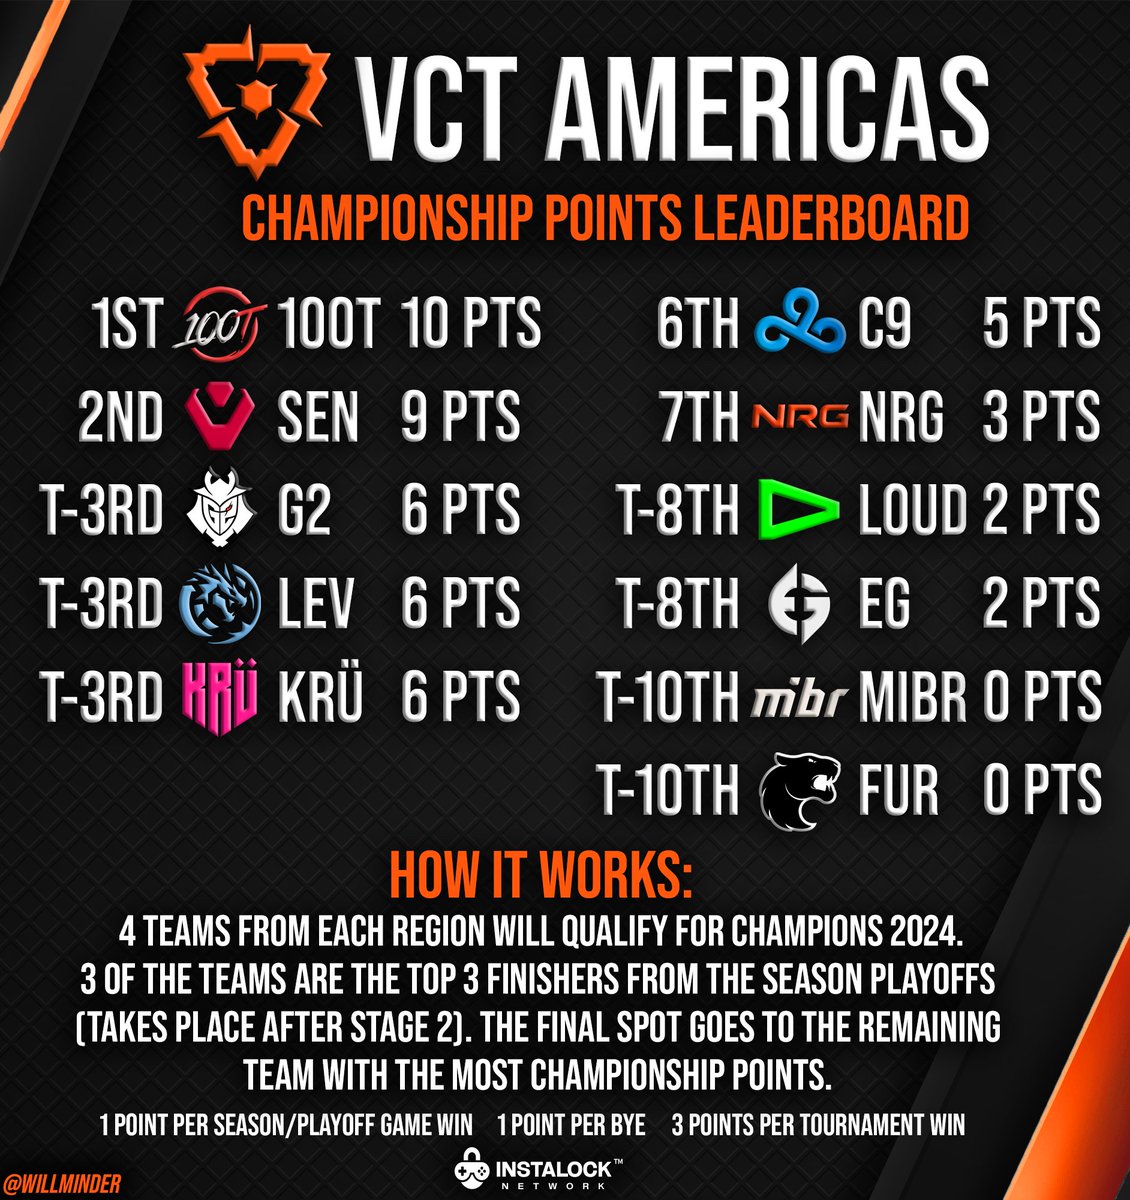 Updated VCT Americas Championship Points Leaderboard after Stage 1 | @INSTALOCKnet 

100 Thieves has overtaken Sentinels in points